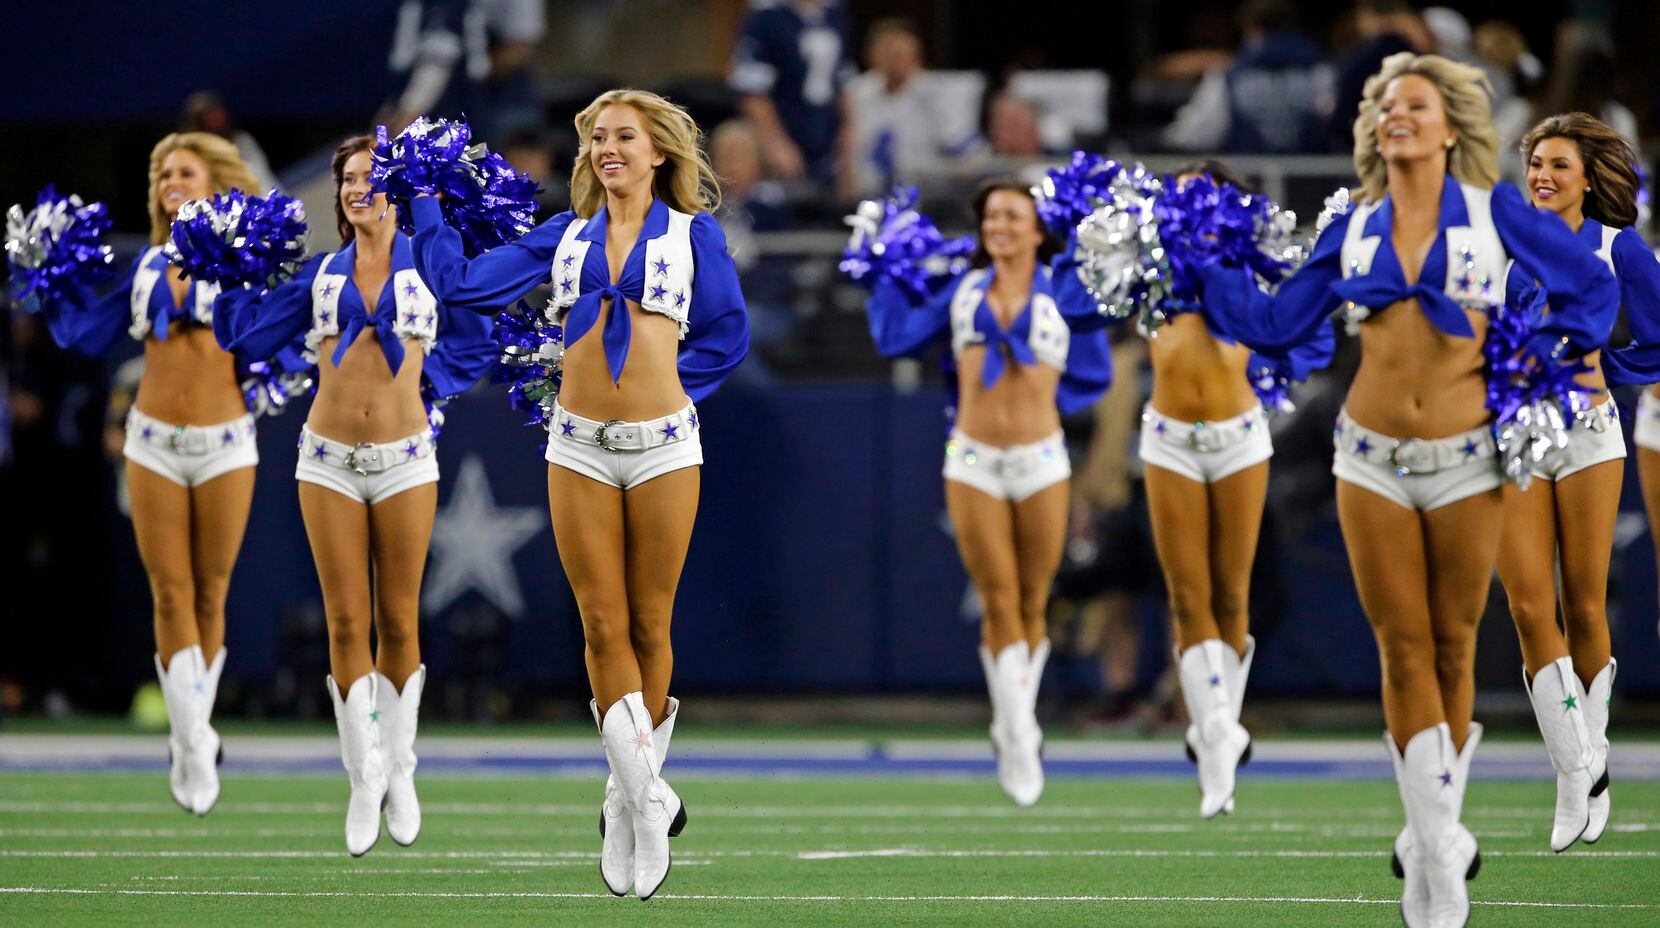 The Dallas Cowboys cheerleaders fly high during their pregame show before the start of the...